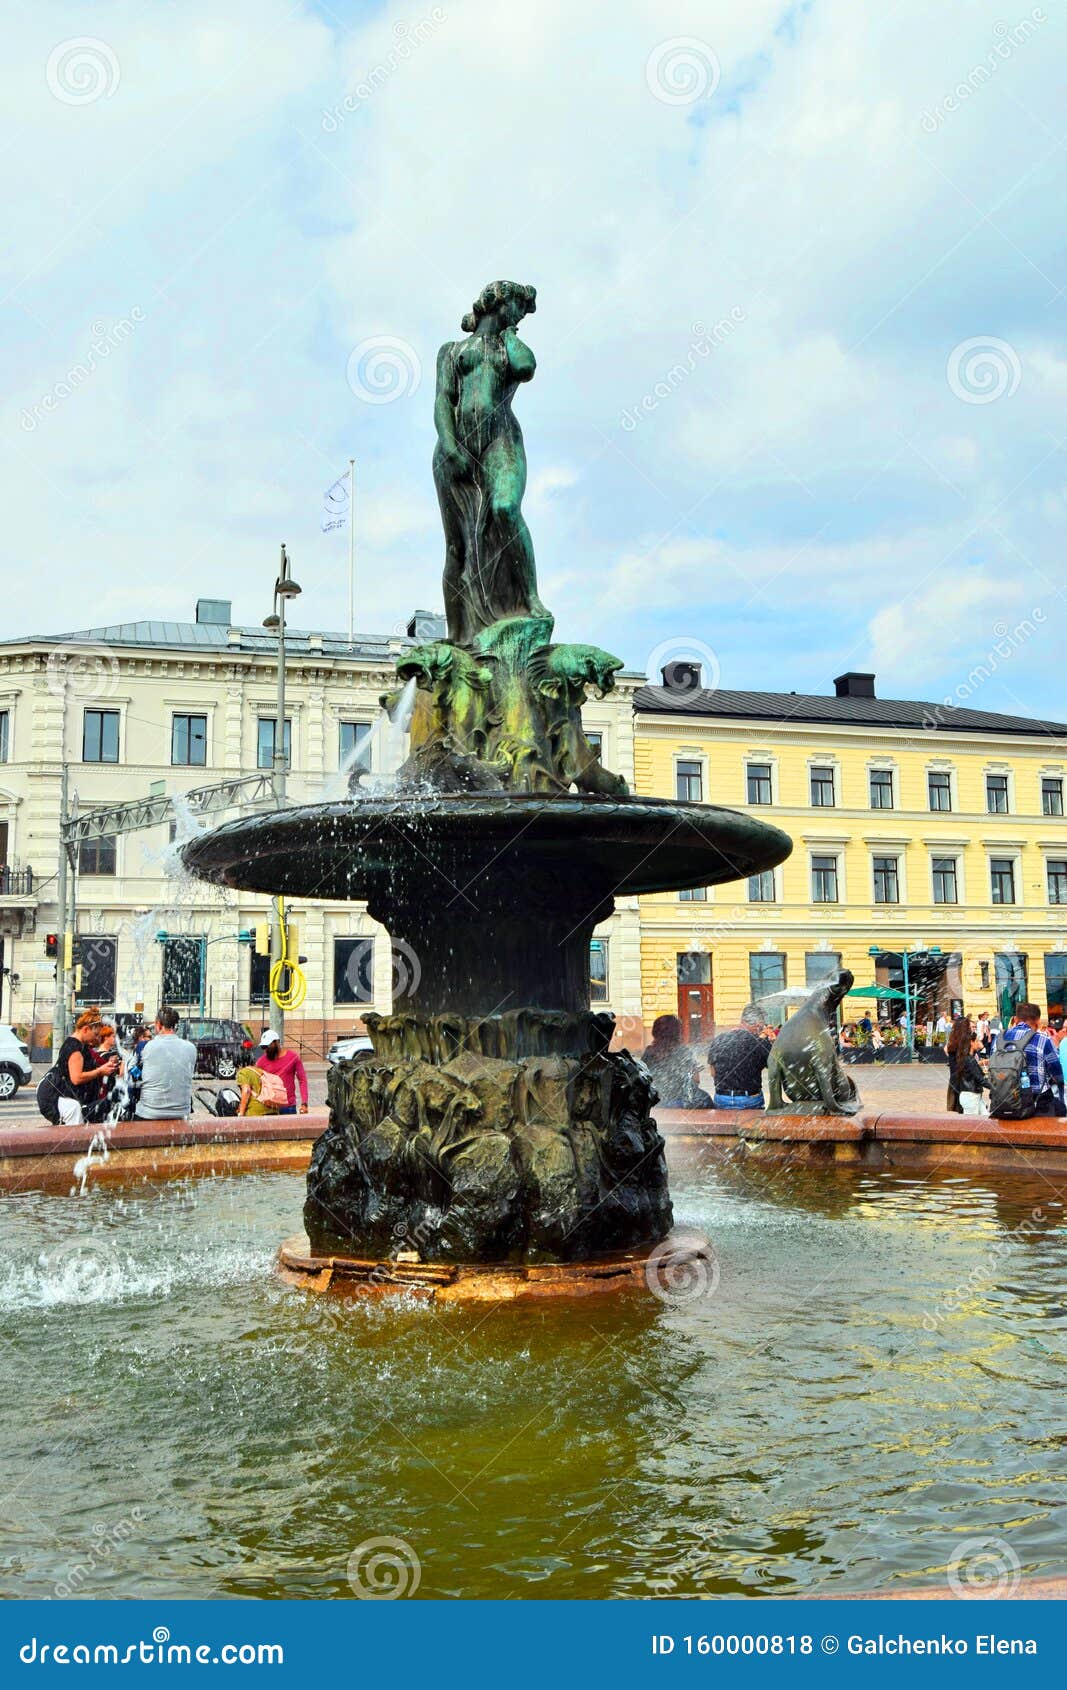 Helsinki is the Capital of Finland Editorial Stock Photo - Image of ...